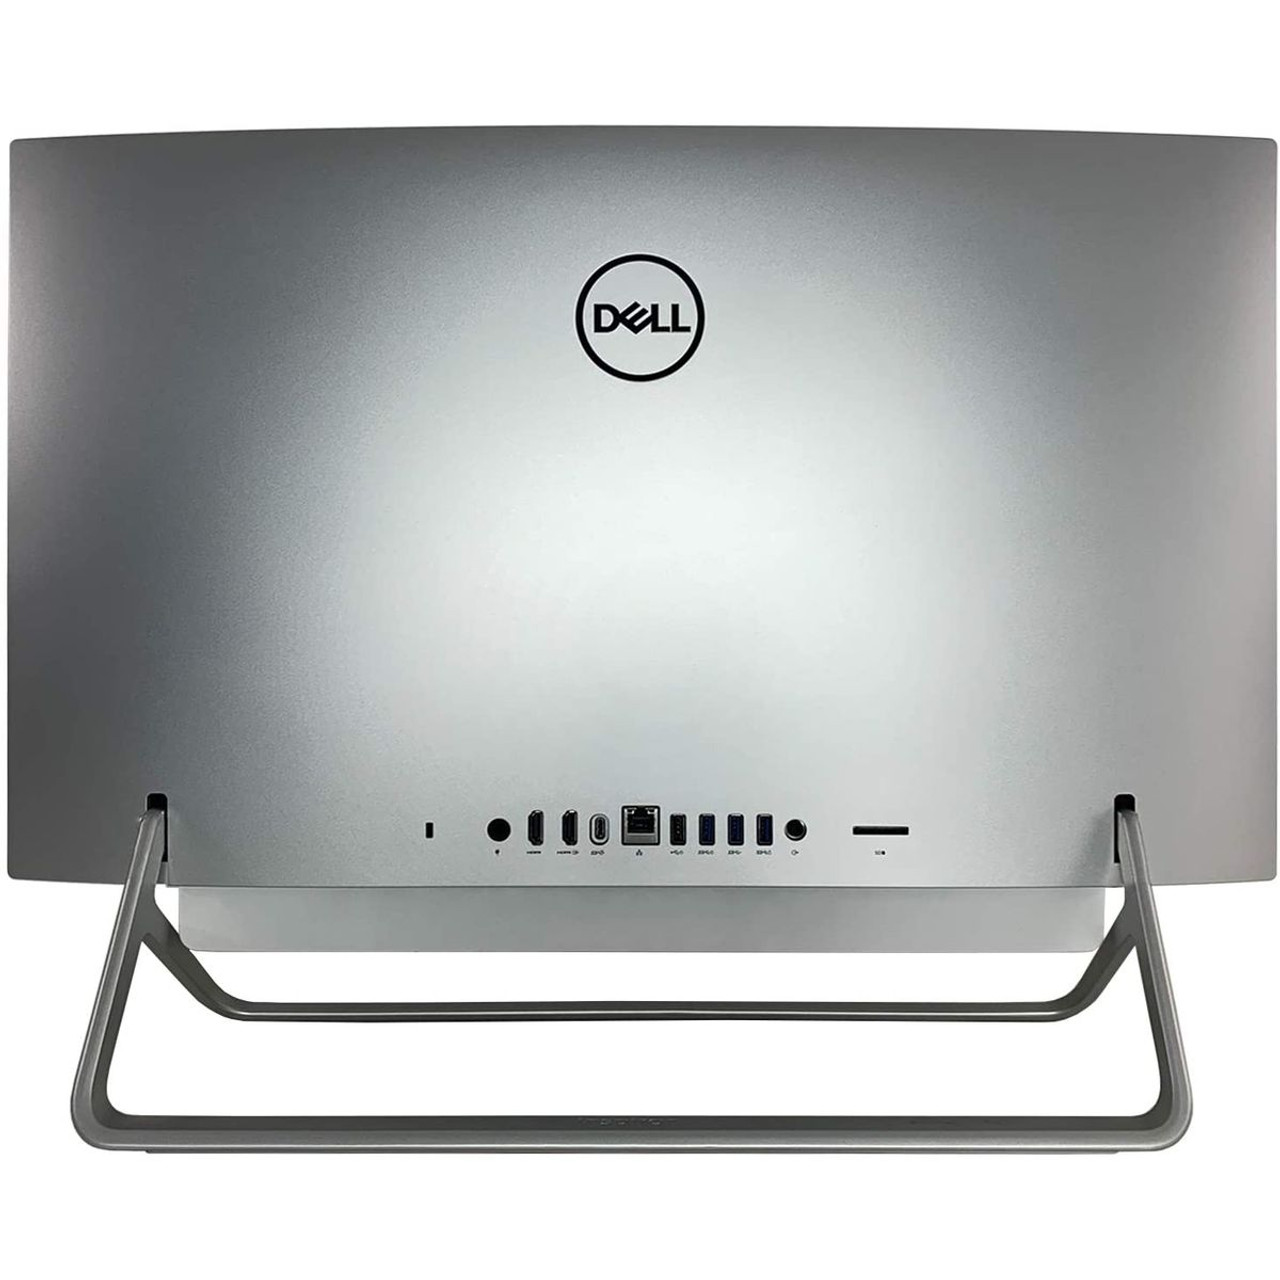 Dell Inspiron 7700 AIO 27 FHD i7-1165G7 32 1TB SSD Desktop Computer product image